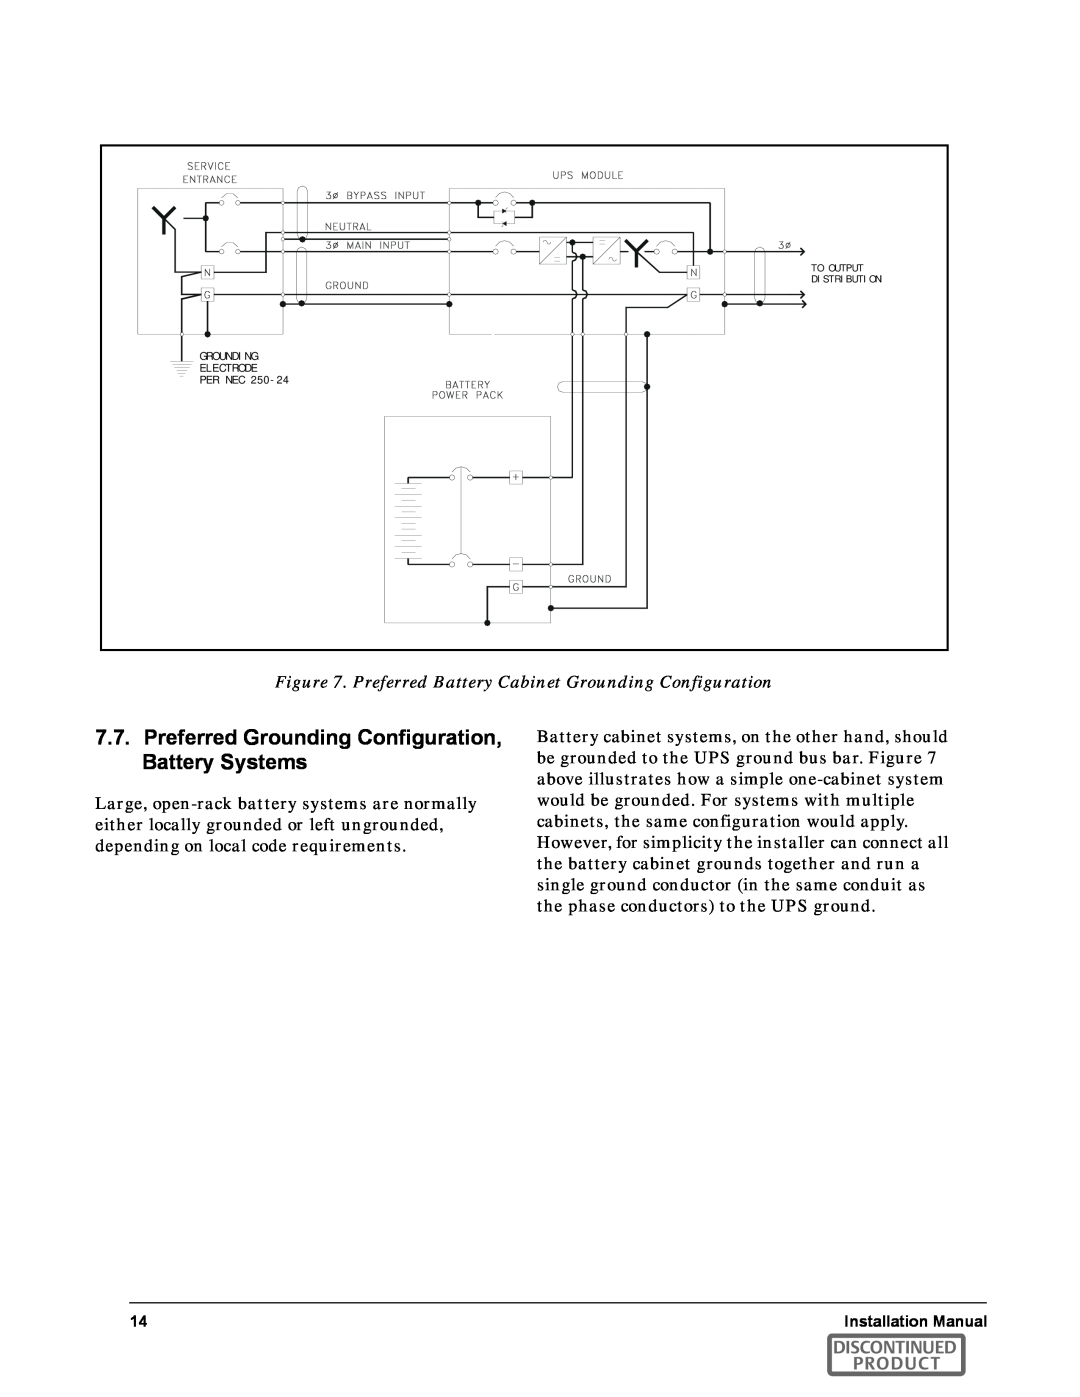 Emerson SERIES 600T Preferred Grounding Configuration, Battery Systems, Preferred Battery Cabinet Grounding Configuration 